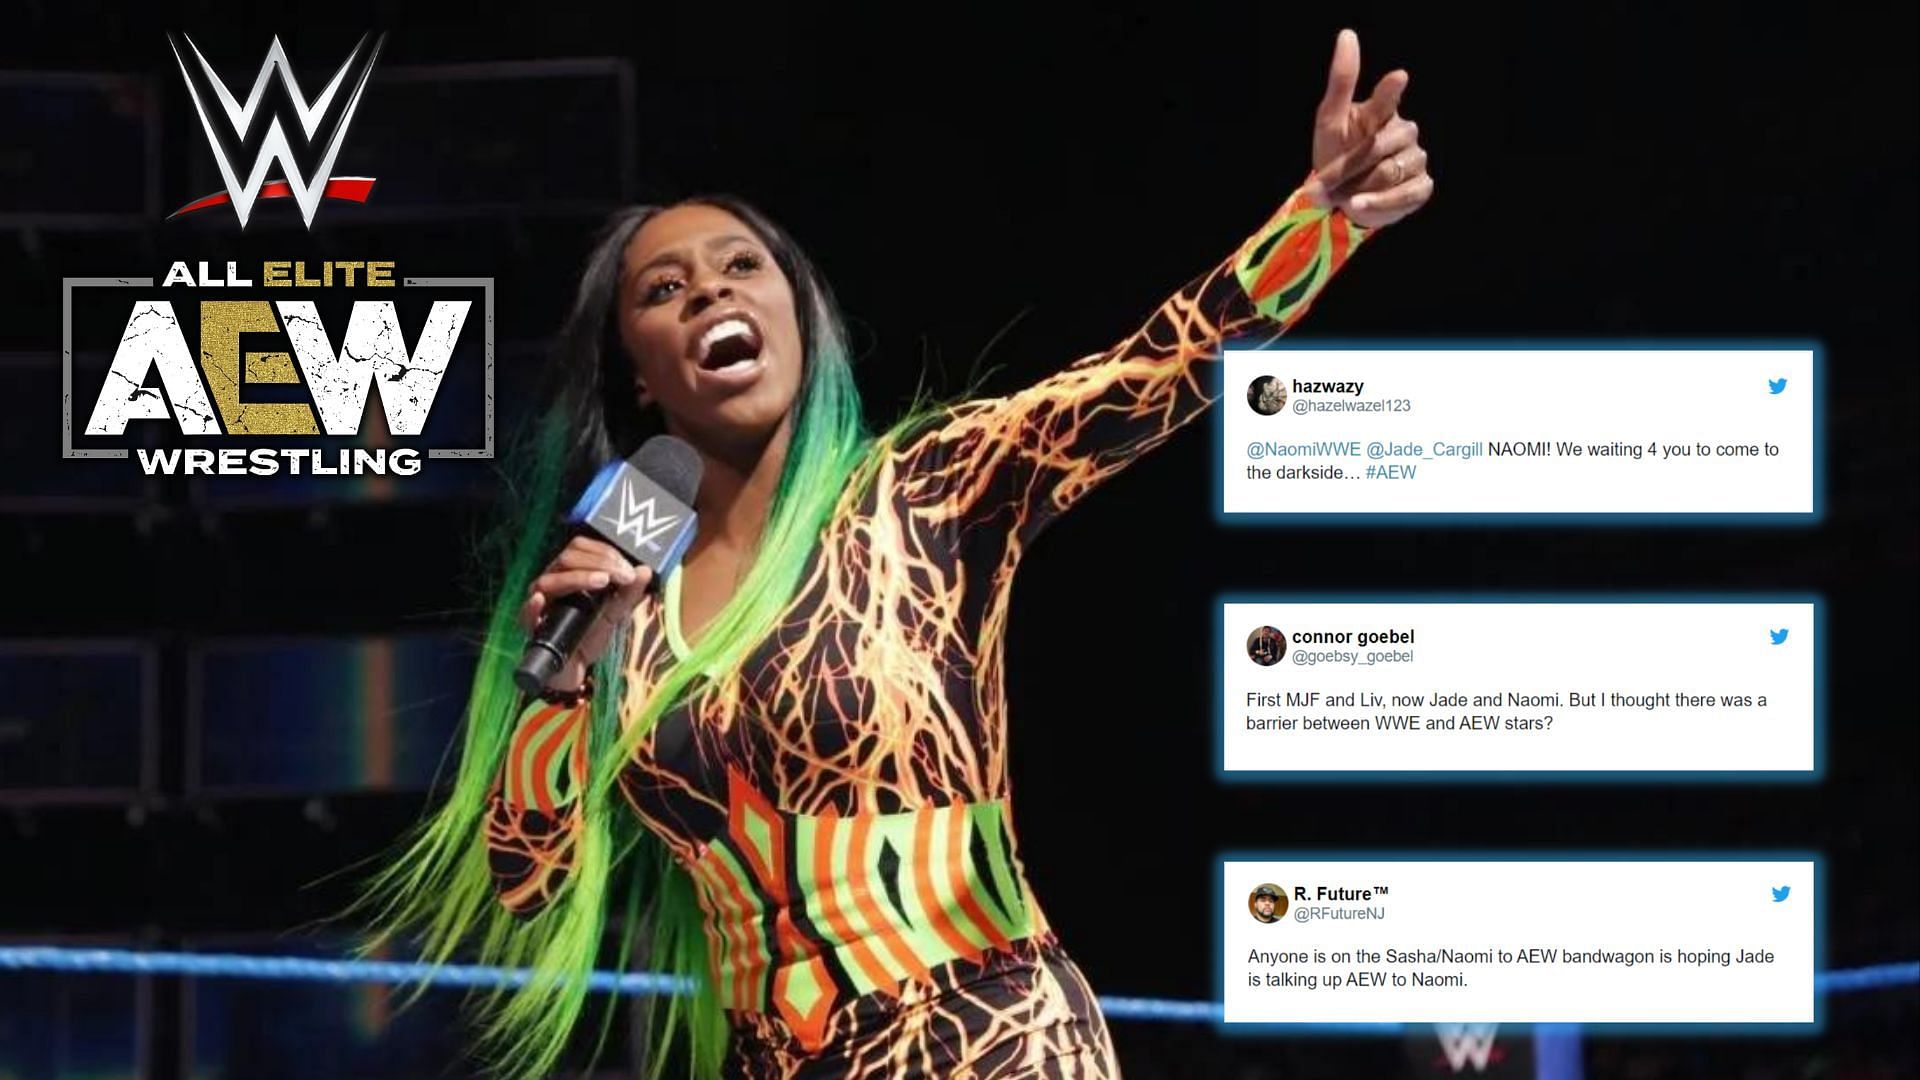 Is Naomi going to join AEW instead of WWE?